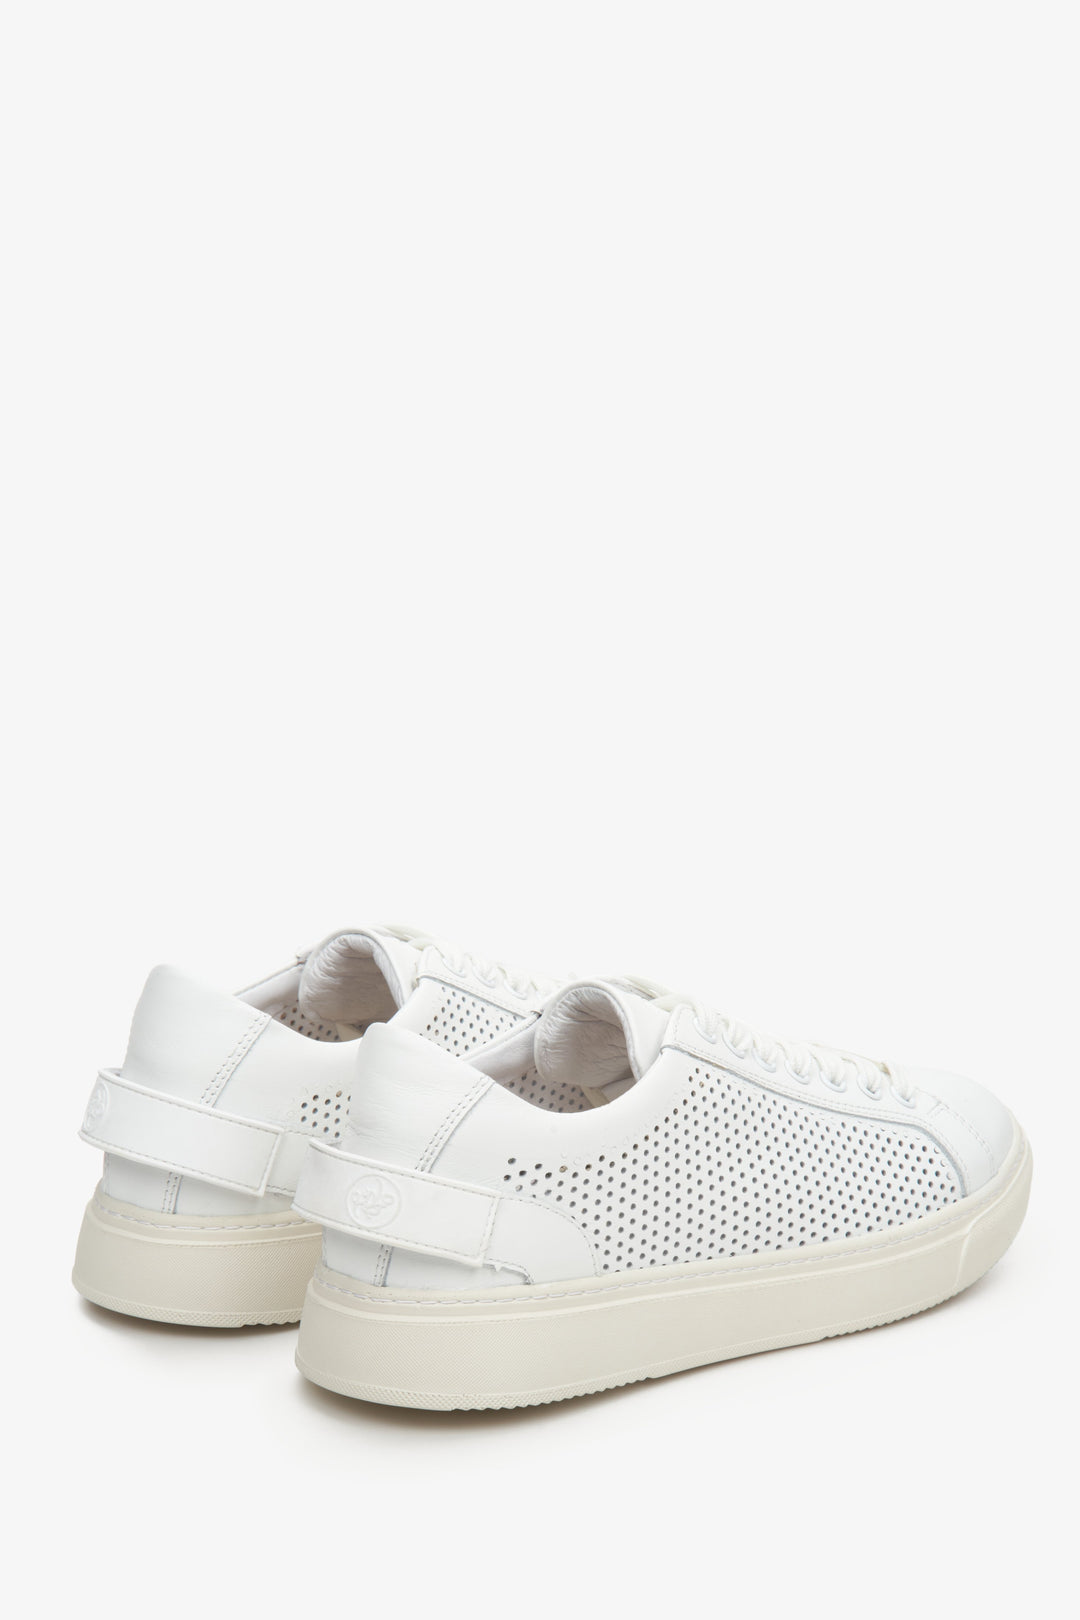 Women's white leather Estro sneakers with perforation for fall/spring - close-up on the heel and side seam.